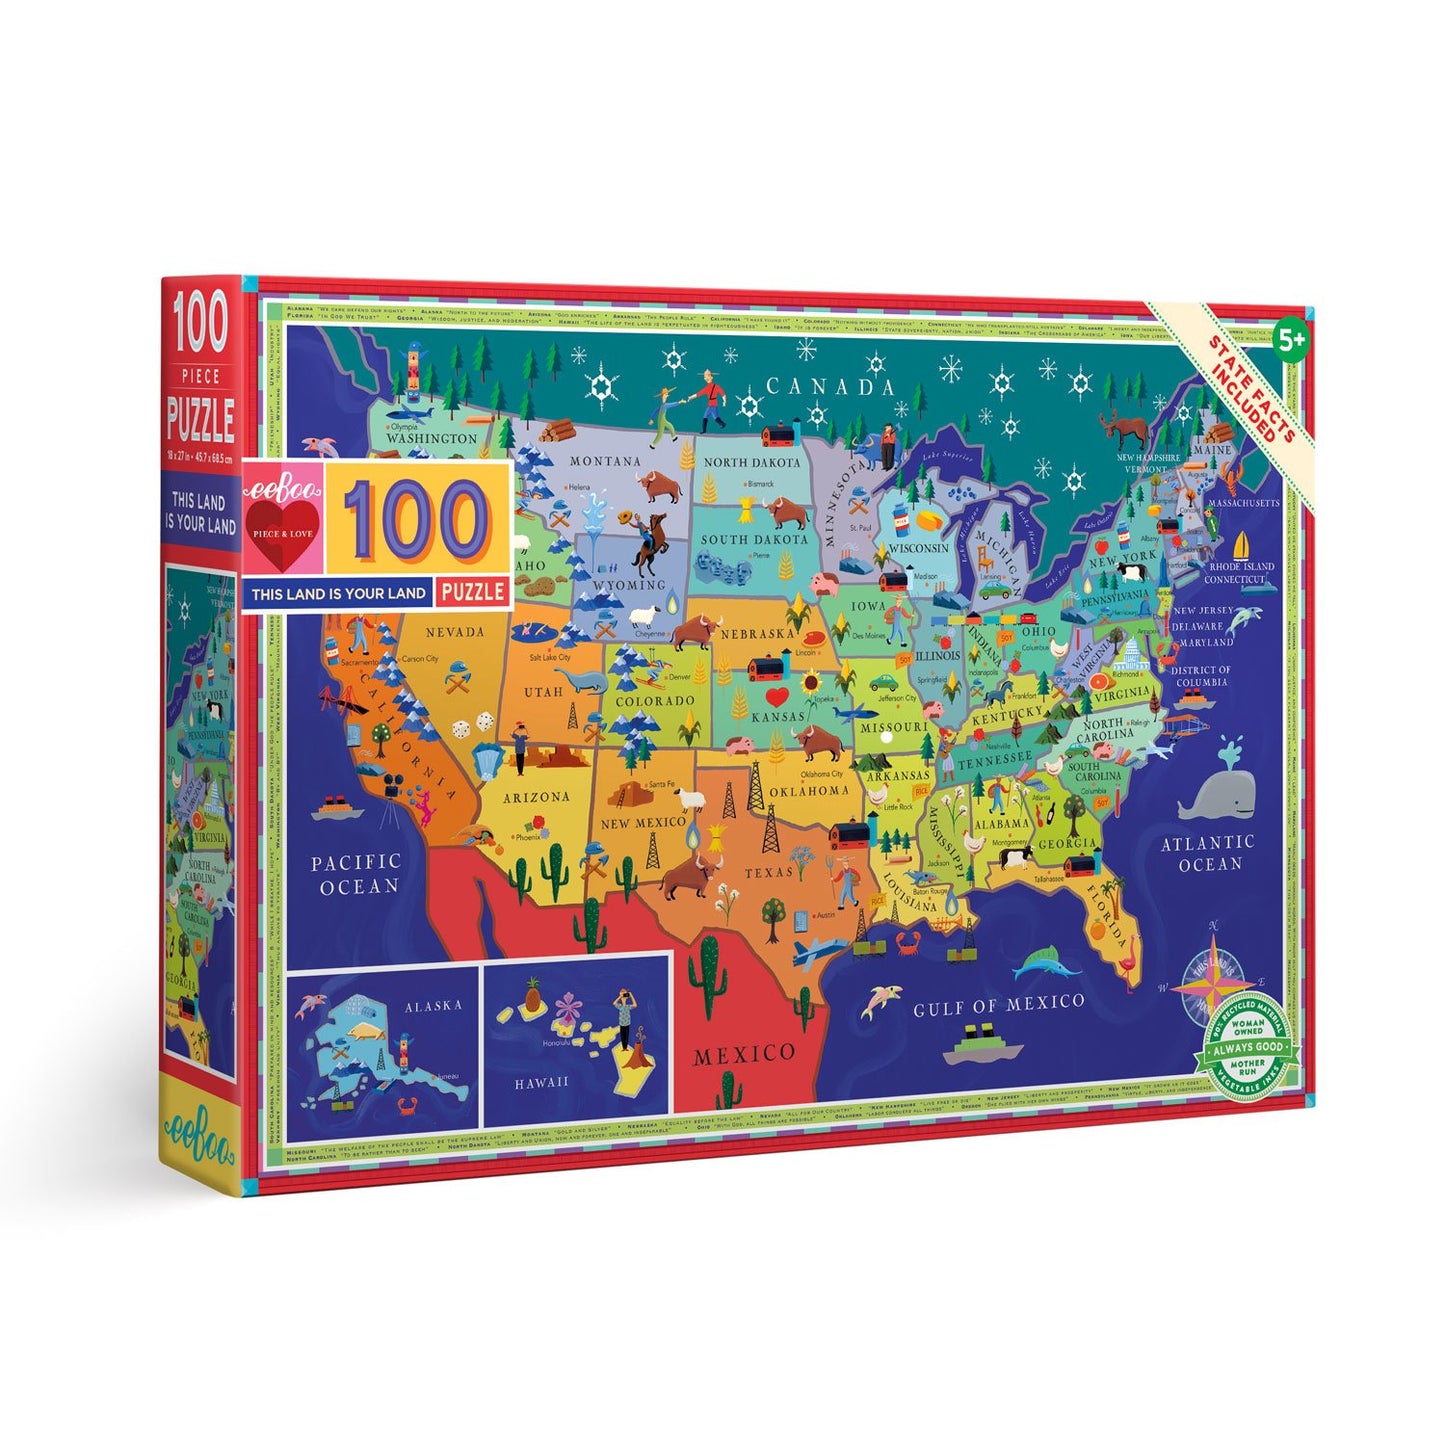 This Land is Your Land United States 100 Piece Jigsaw Puzzle eeBoo 5+